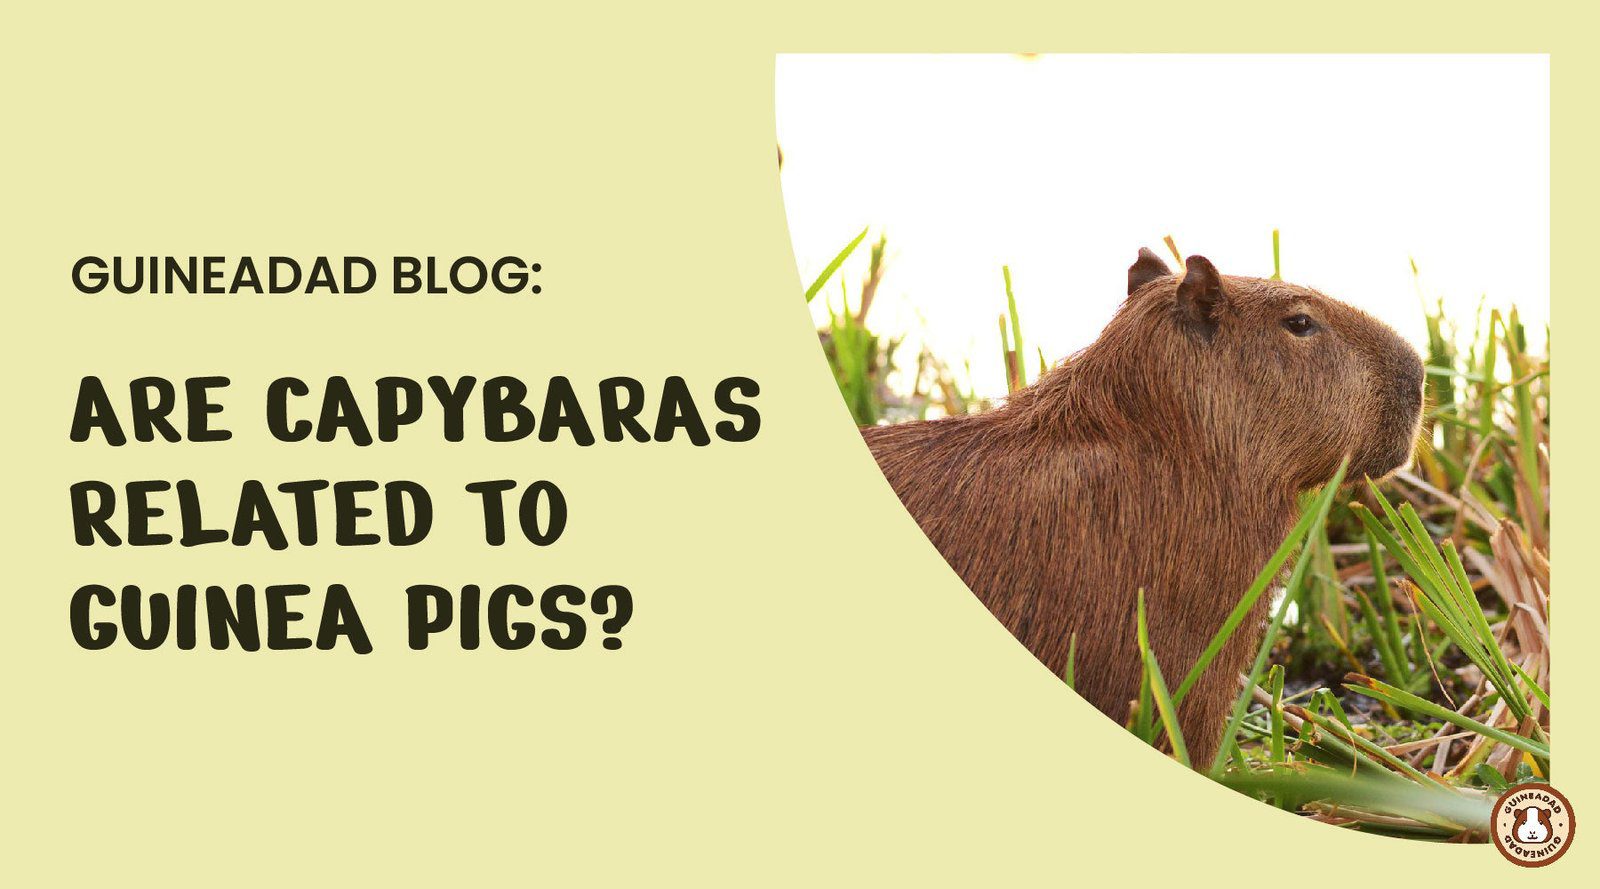 The Similarities and Differences Between Capybaras and Guinea Pigs